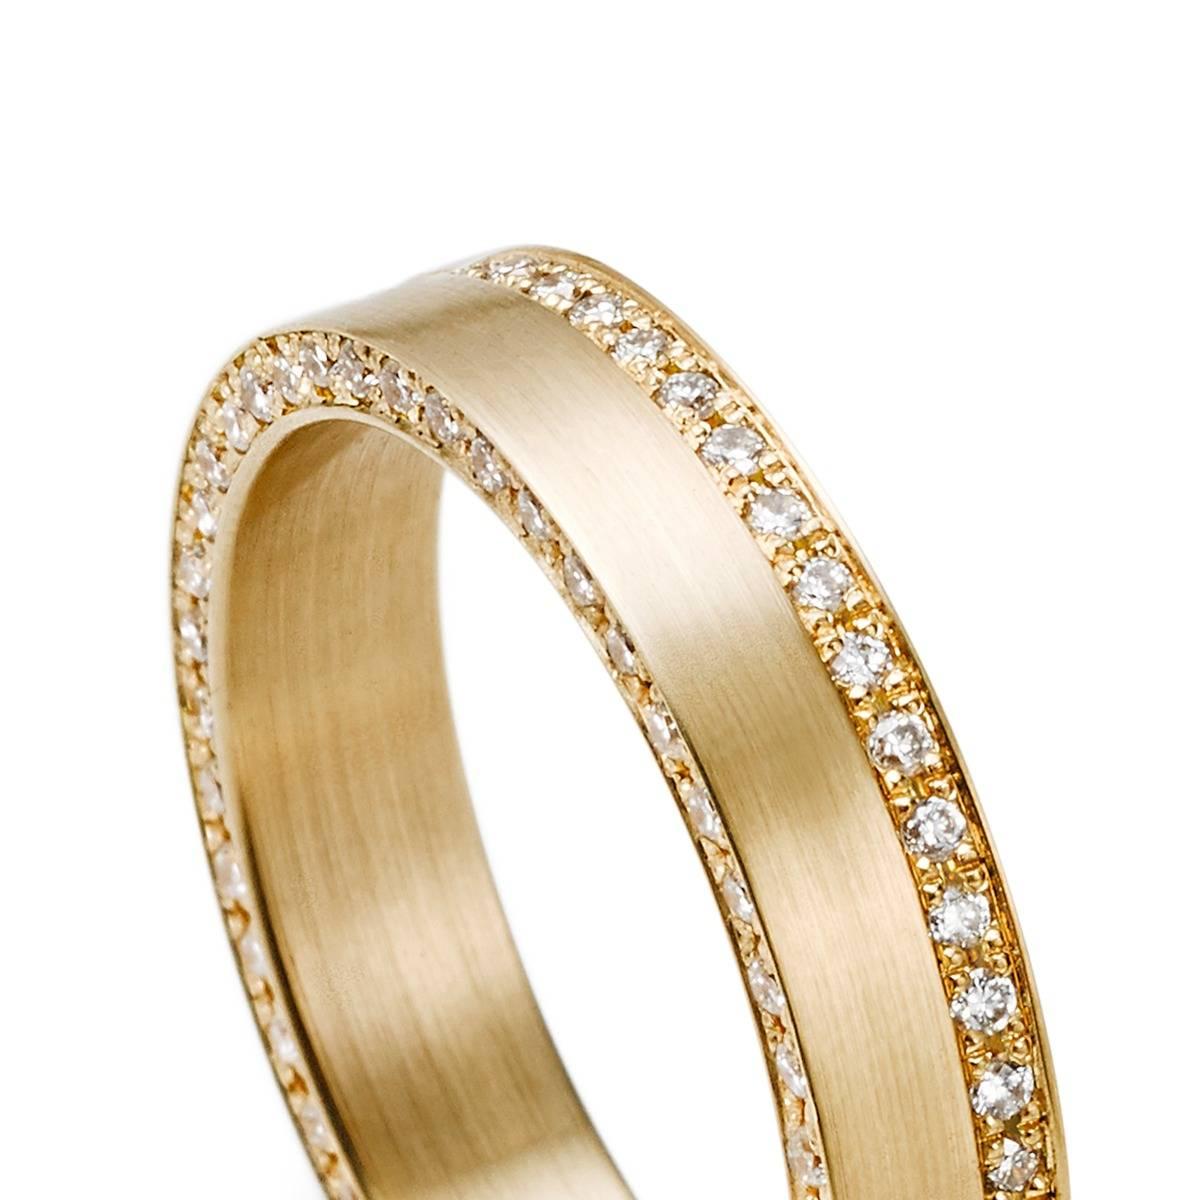 18 Karat Yellow Gold Diamond Ring In New Condition For Sale In Shibuya, Tokyo, JP